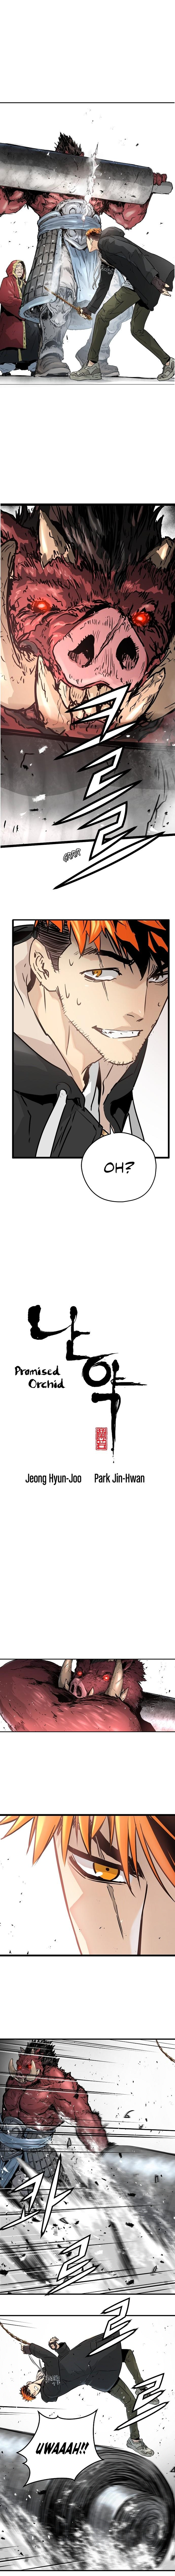 Read Promised Orchid Chapter 19 on Mangakakalot